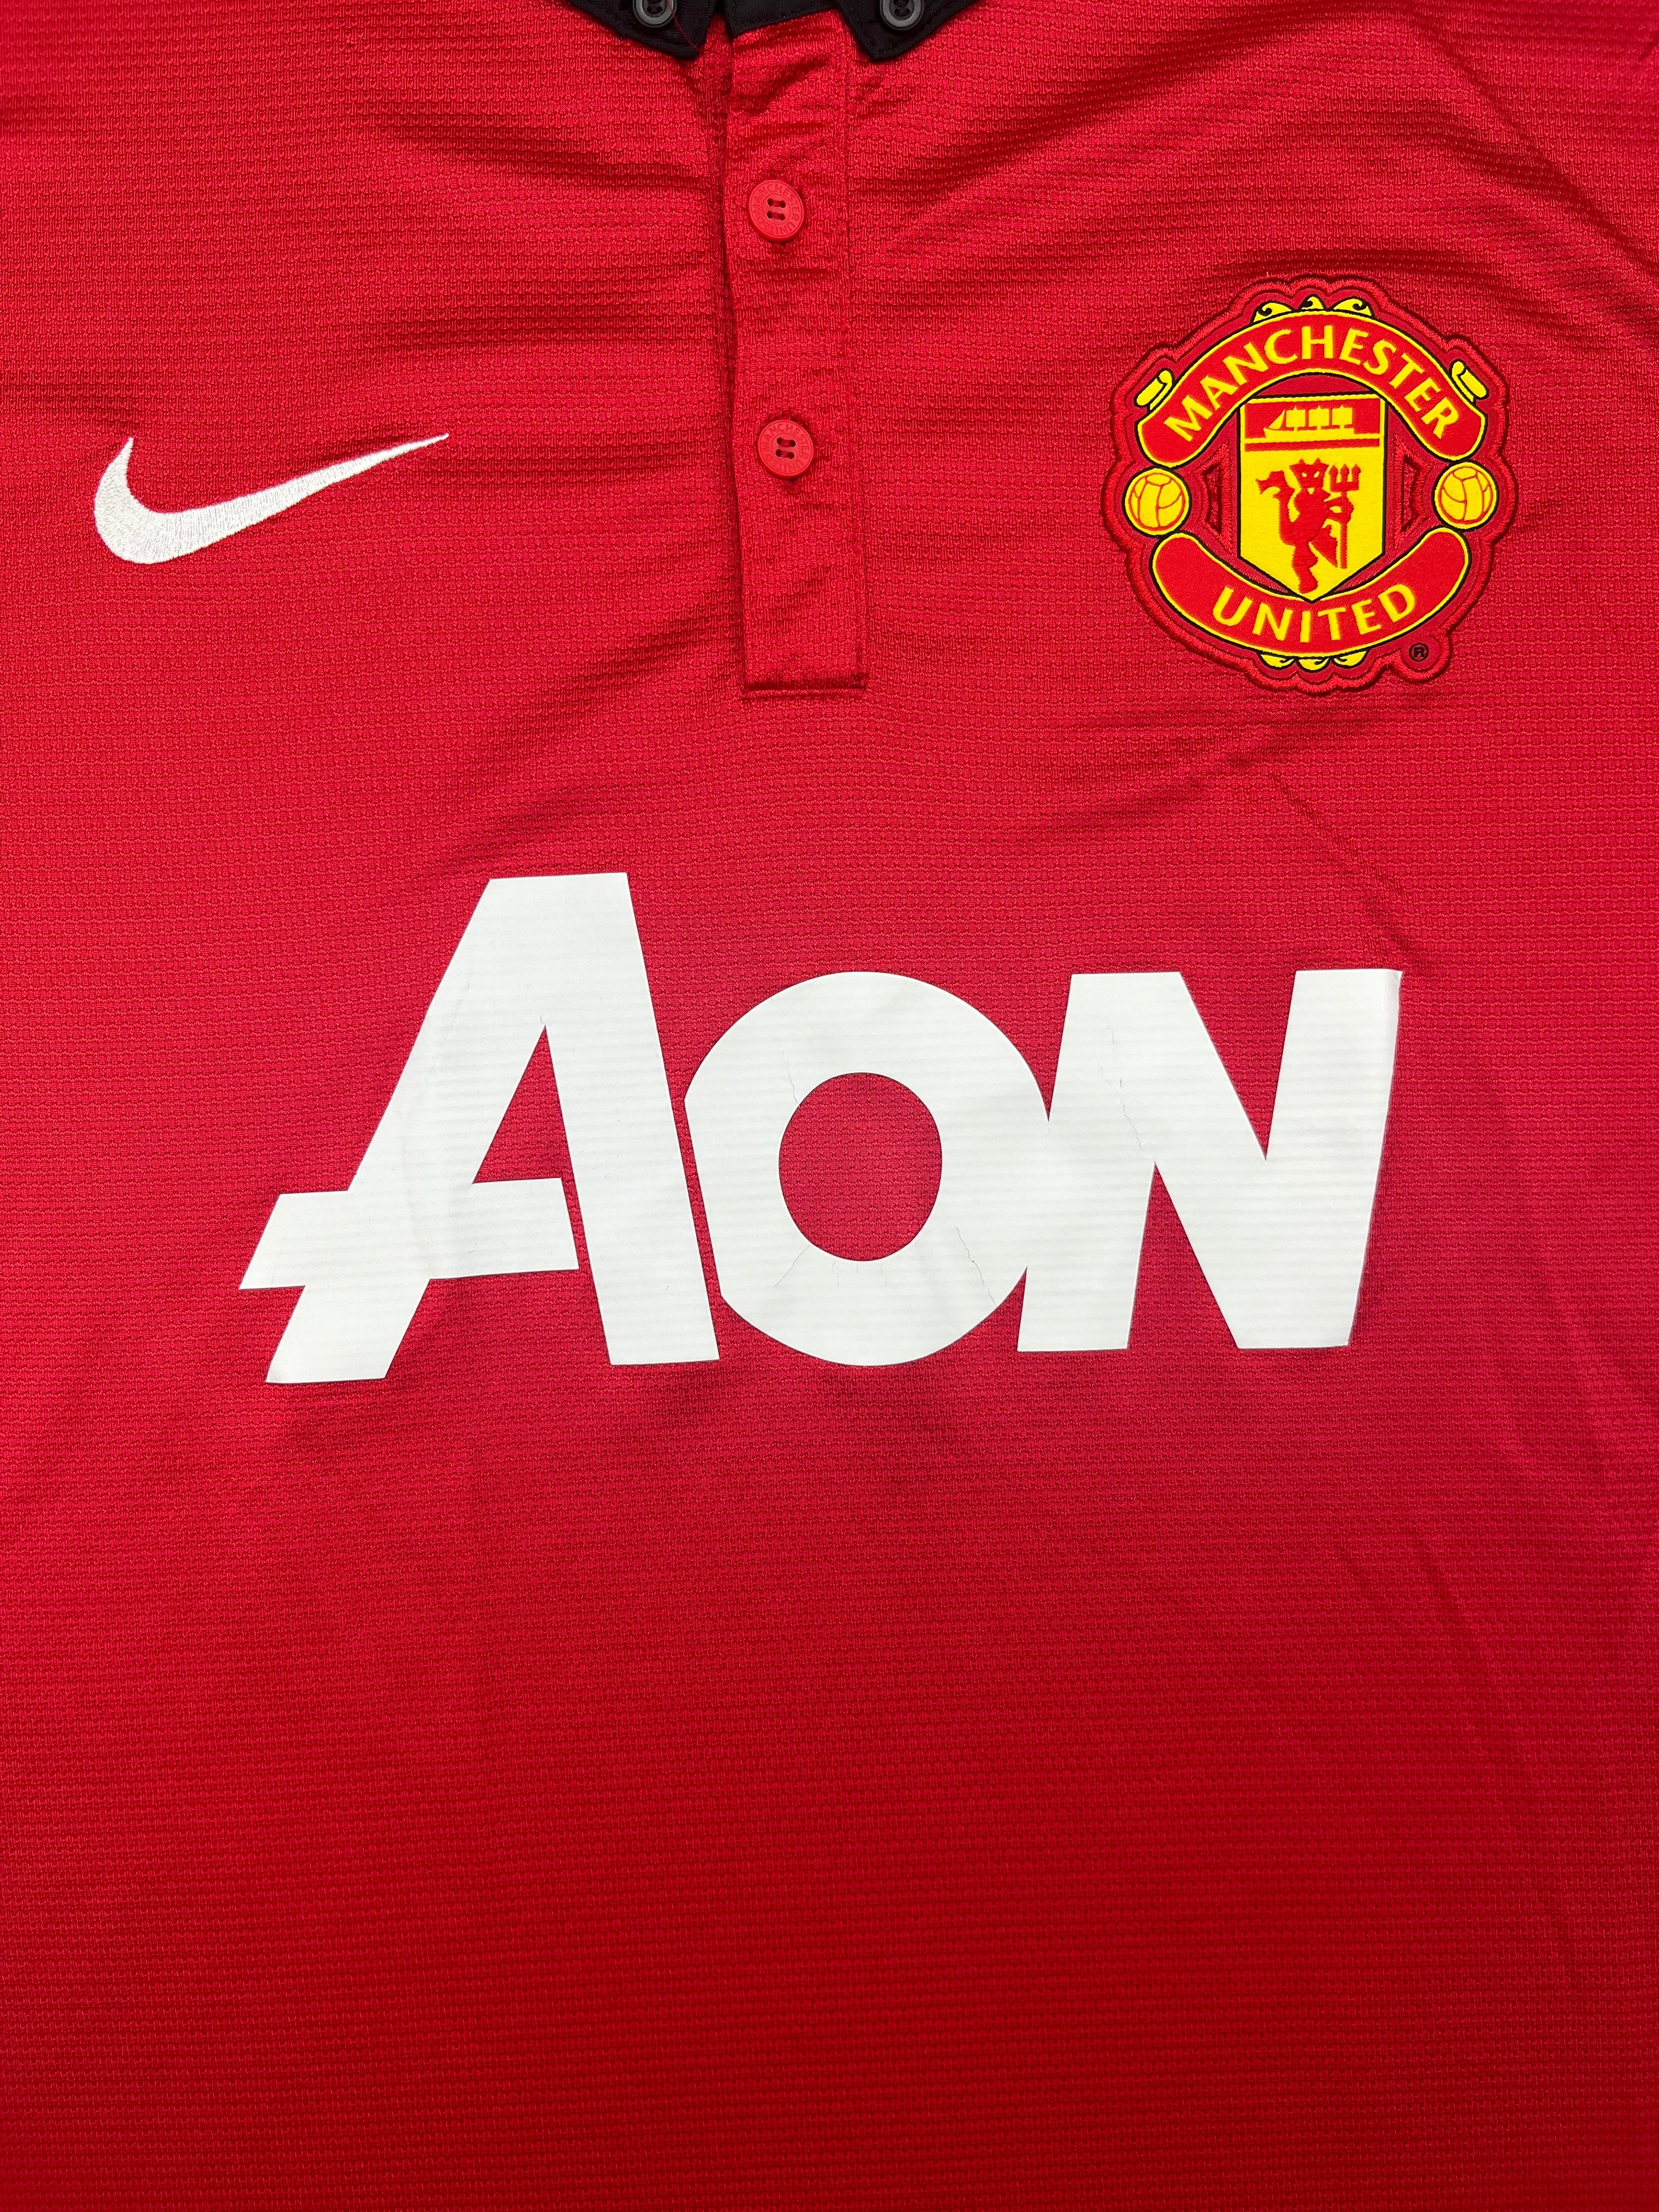 2013/14 Manchester United Home Shirt (L) 8.5/10